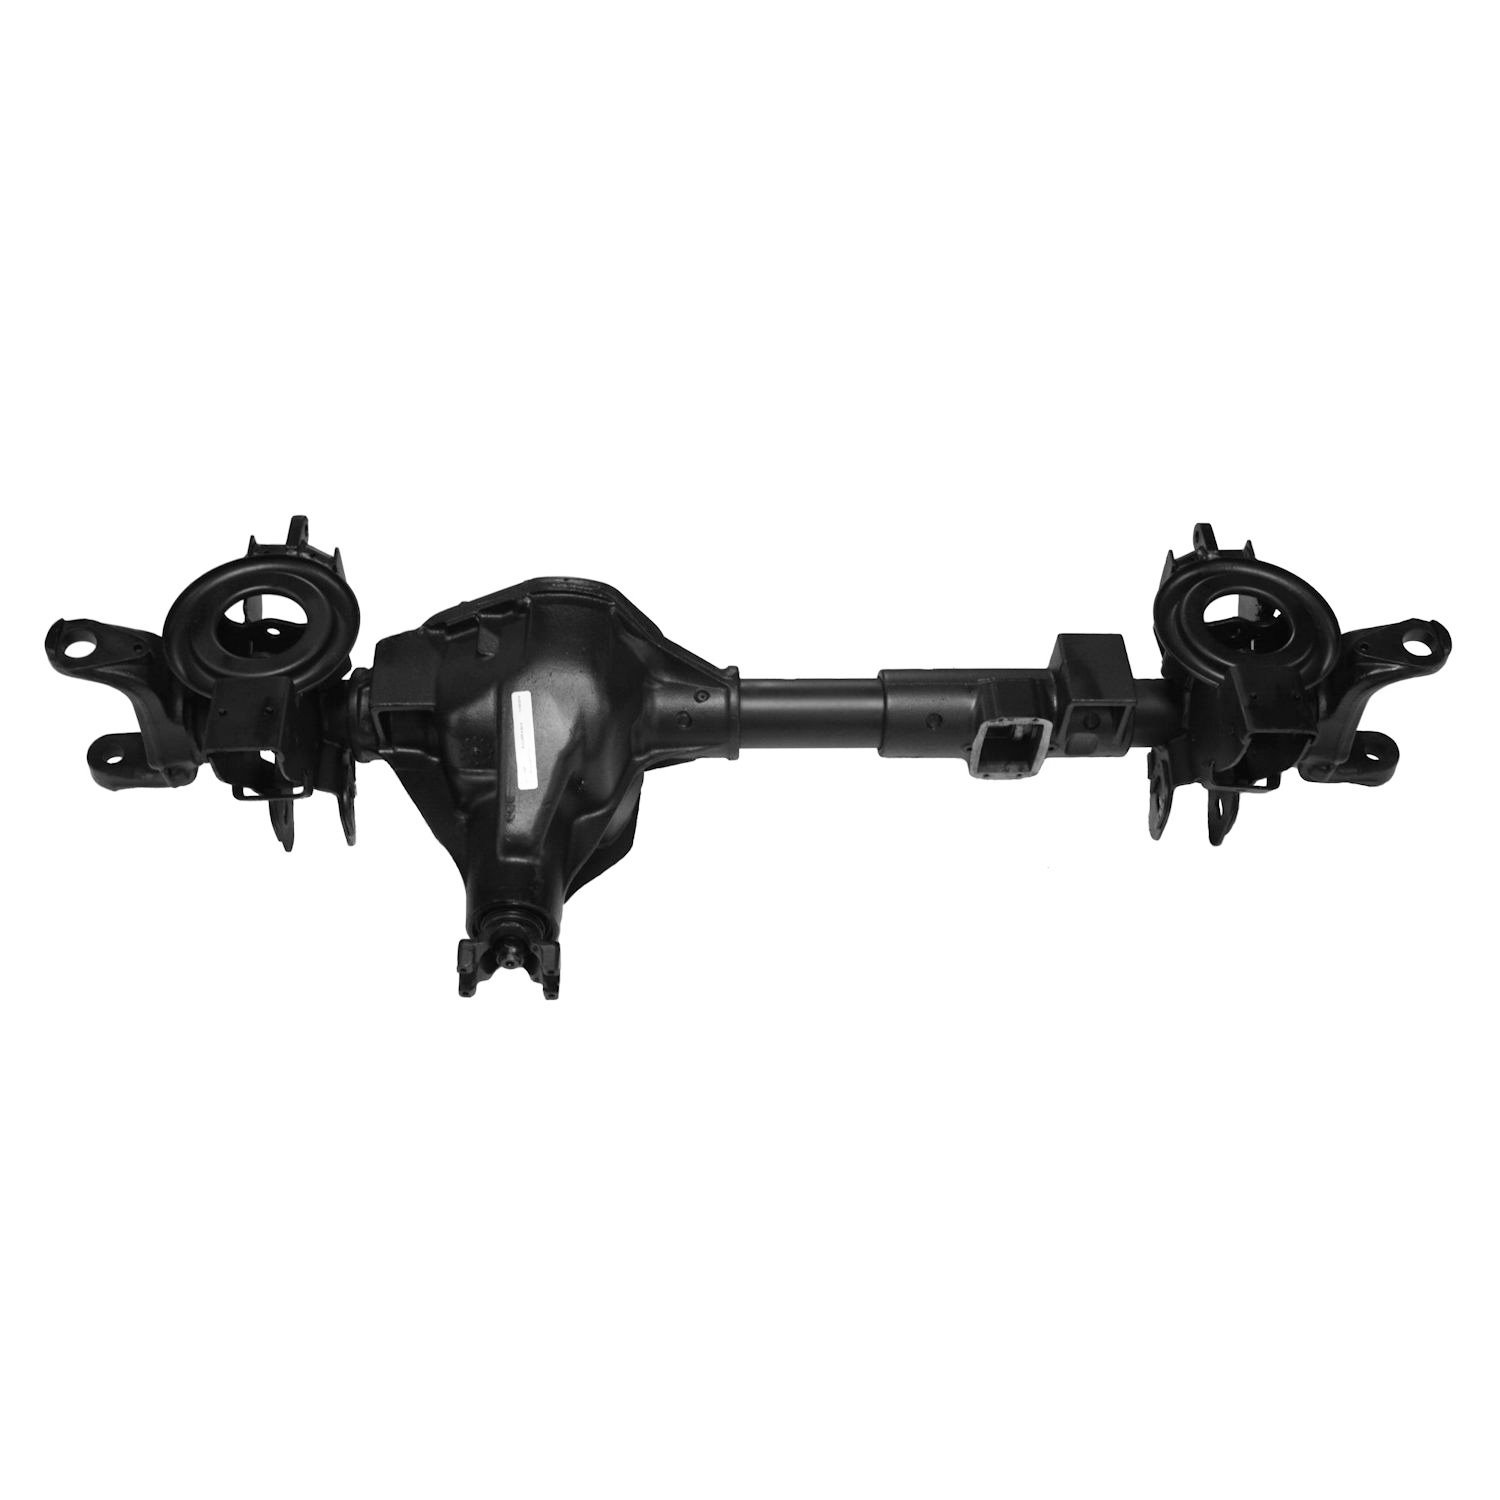 Remanufactured Complete Axle Assembly for Dana 60 1999 Ram 2500 3.54 with Rear Wheel ABS